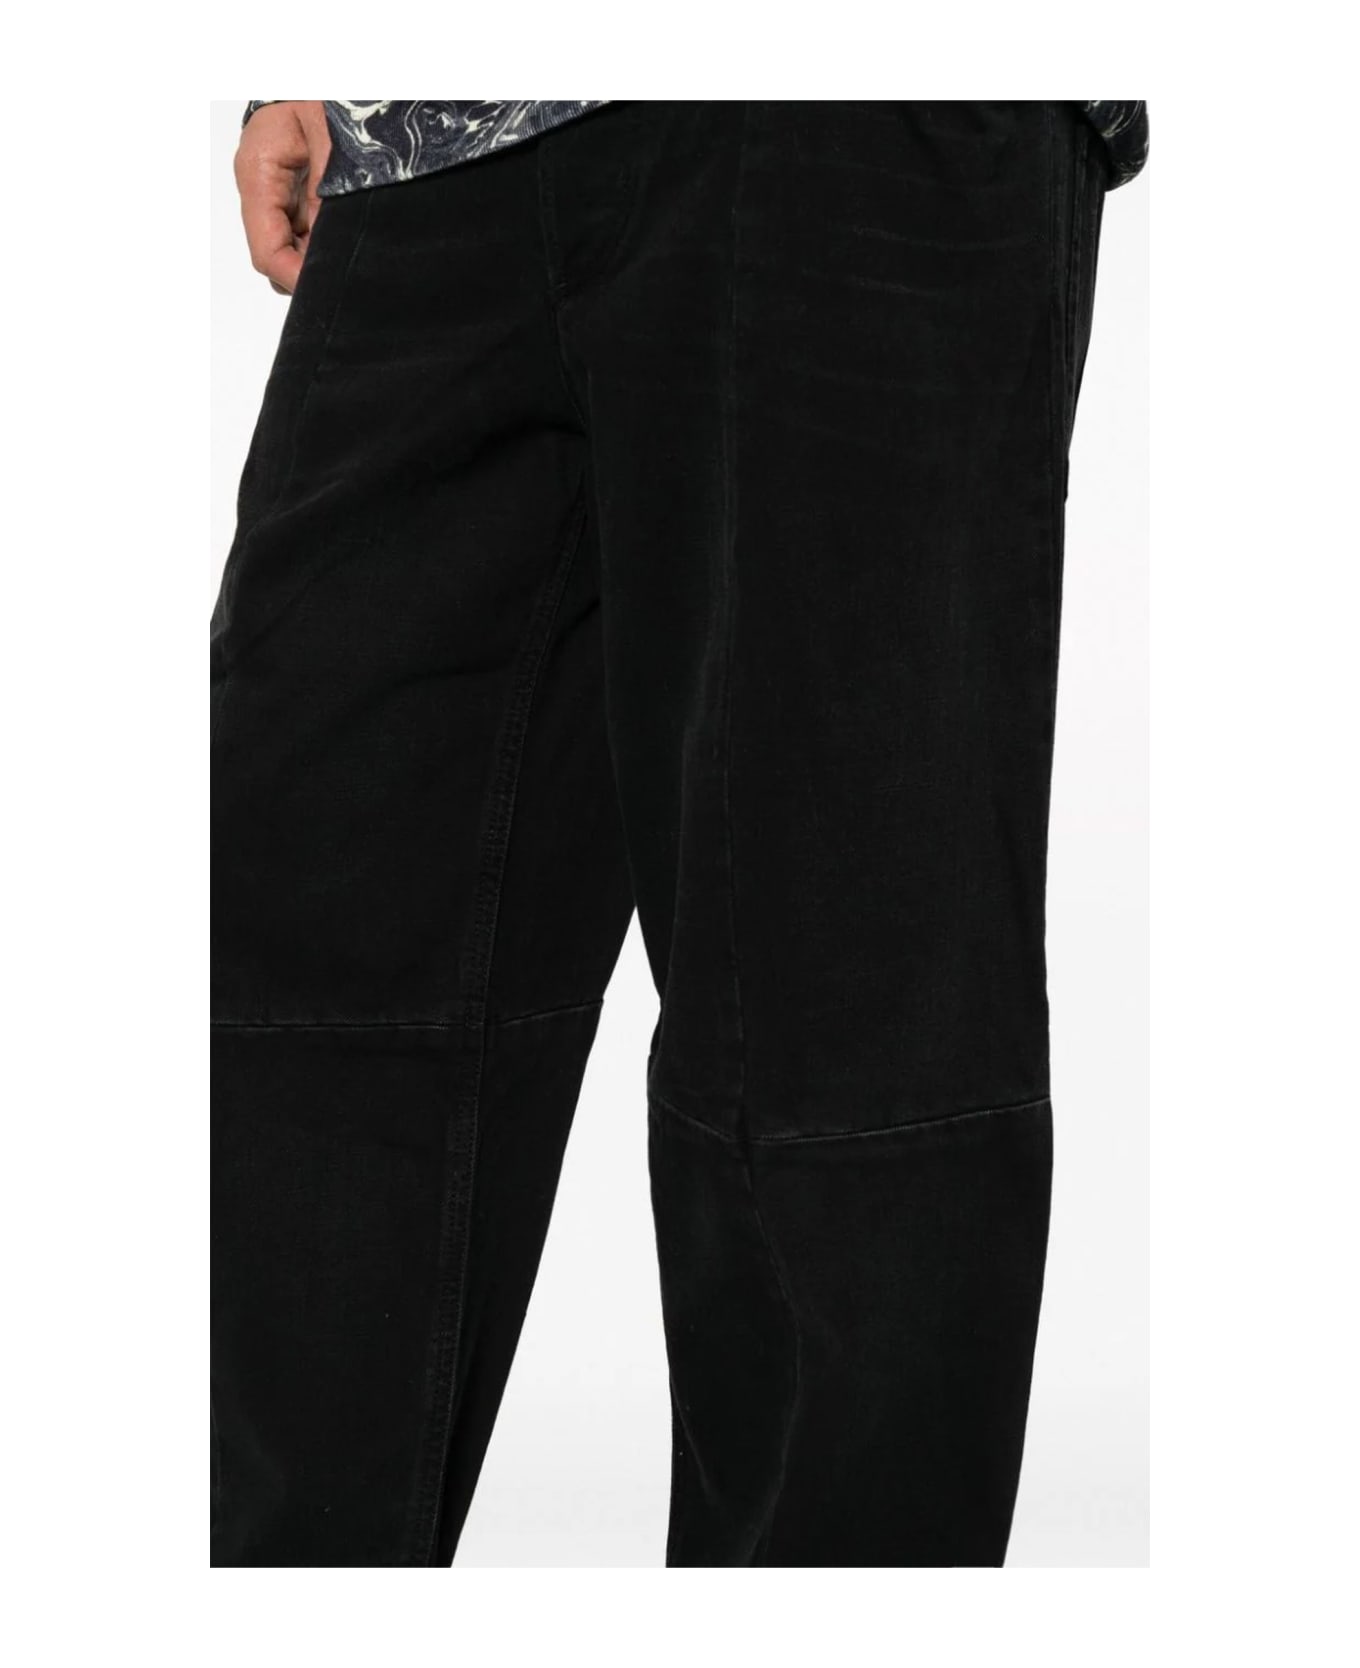 Isabel Marant Cotton Blend Trousers - Nero ボトムス